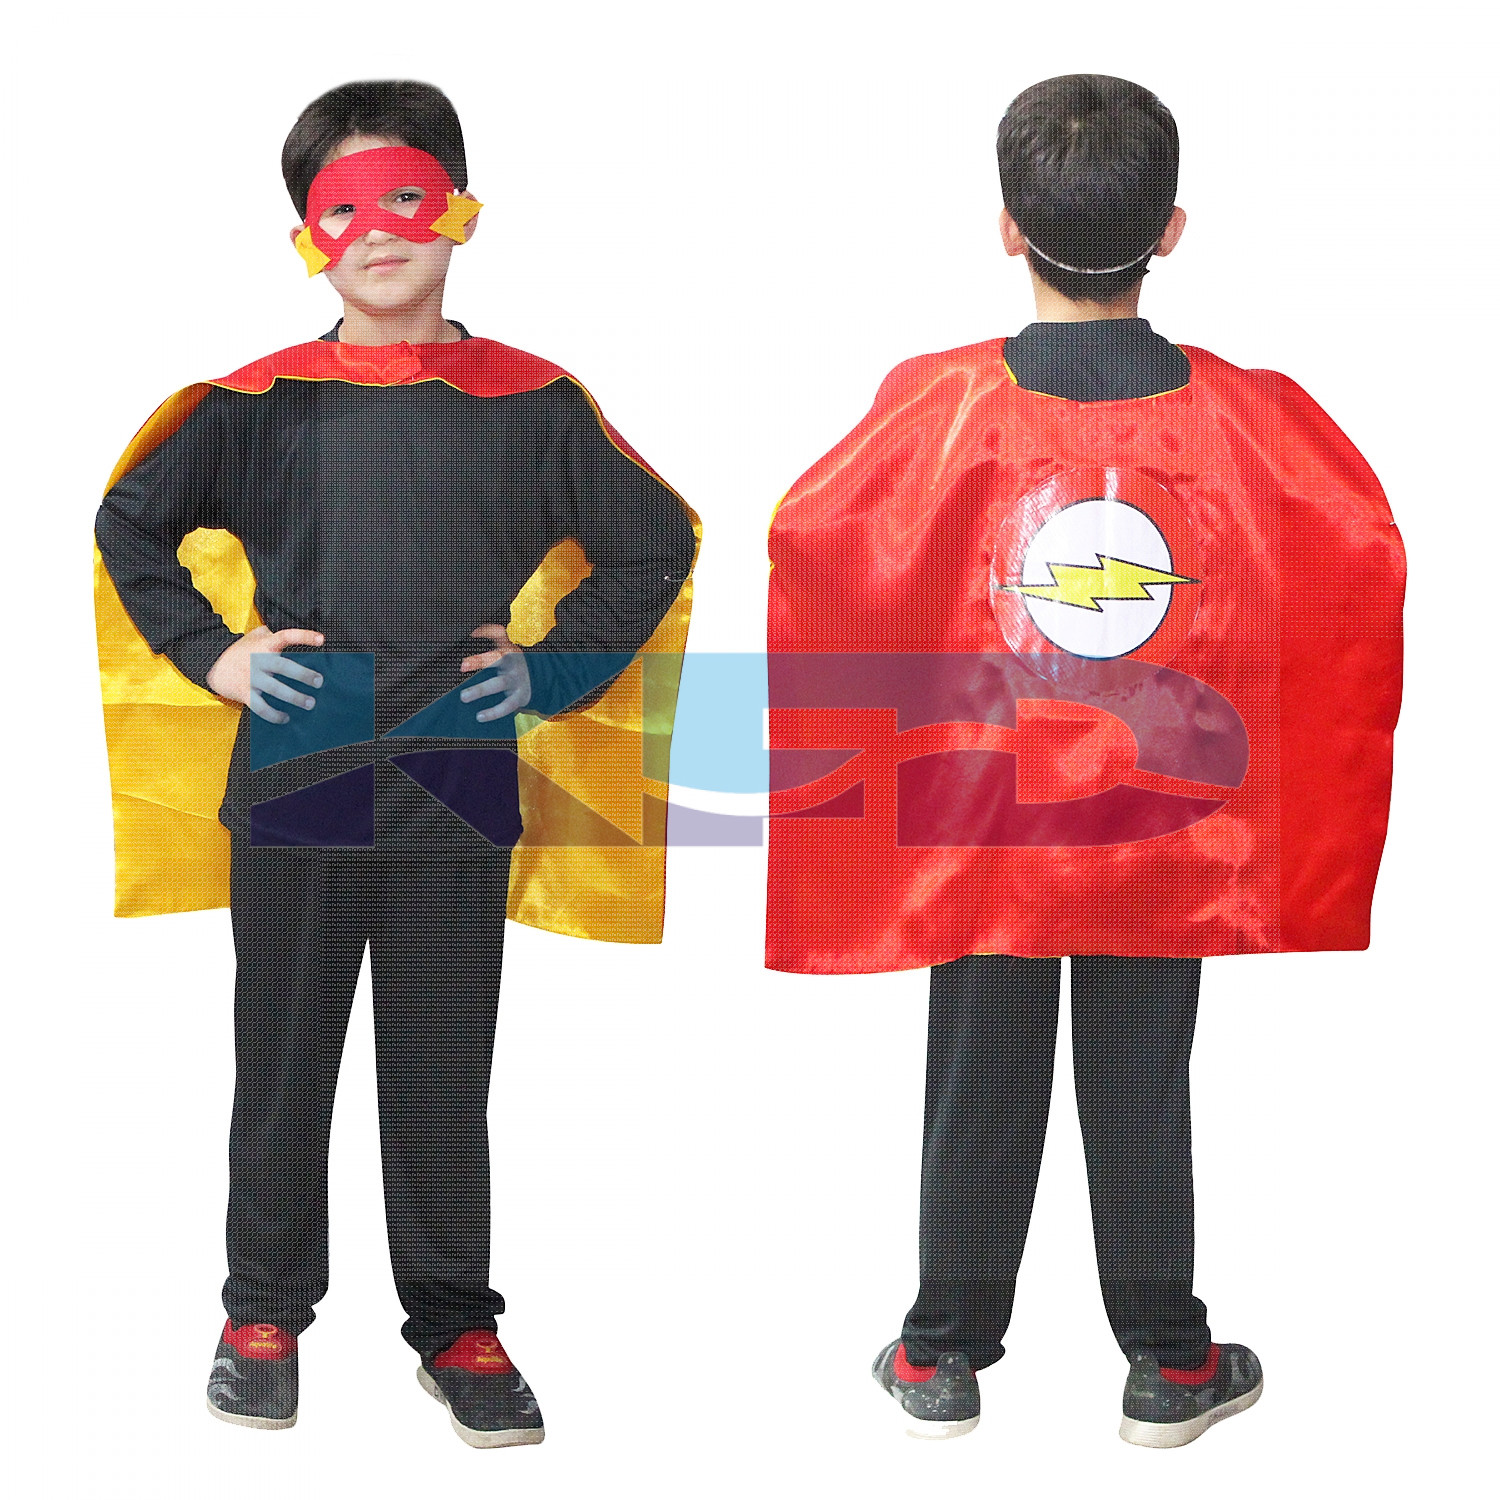 Flash Robe For Kids/California Costume For kids/Superhero Robe For kids/For Kids Annual function/Theme Party/Competition/Stage Shows/Birthday Party Dress